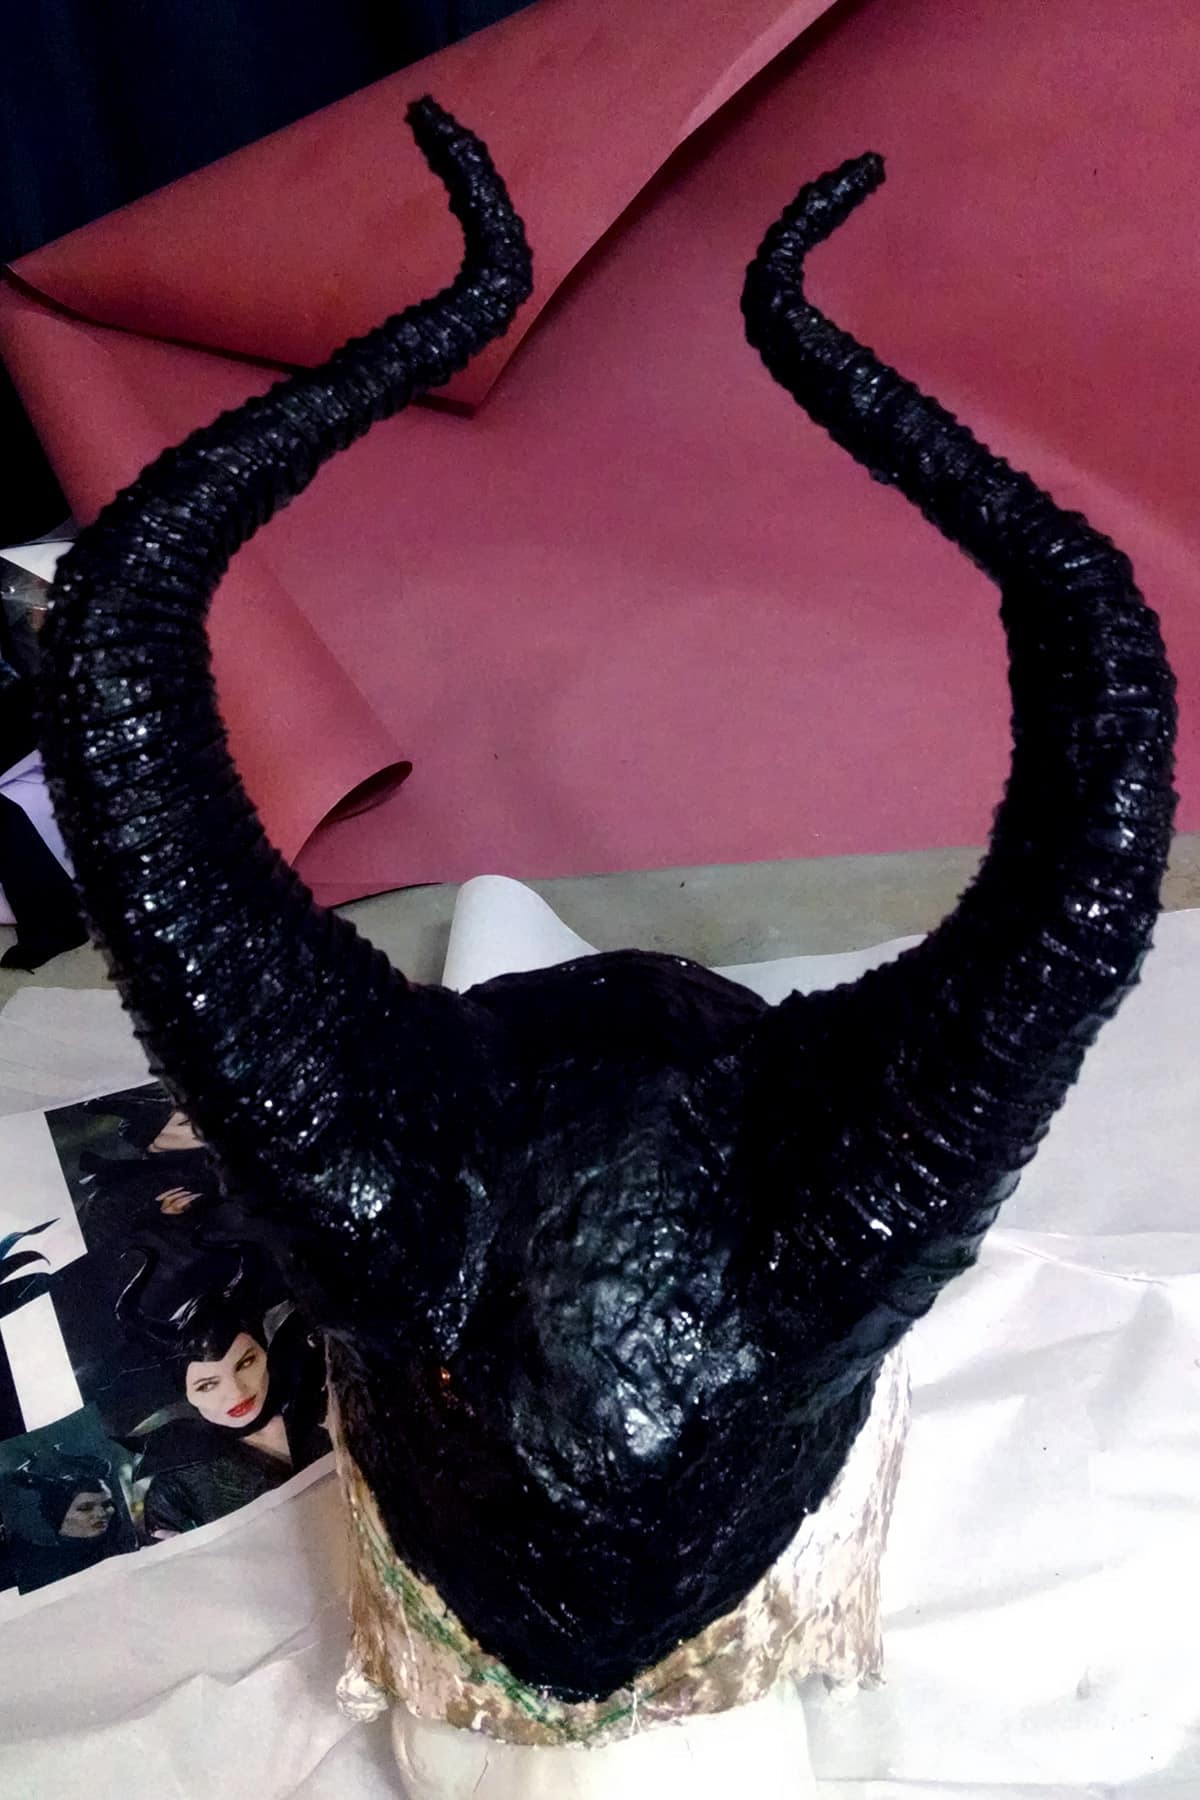 Maleficent's headpiece and horns have been completely coated in shiny black paint.